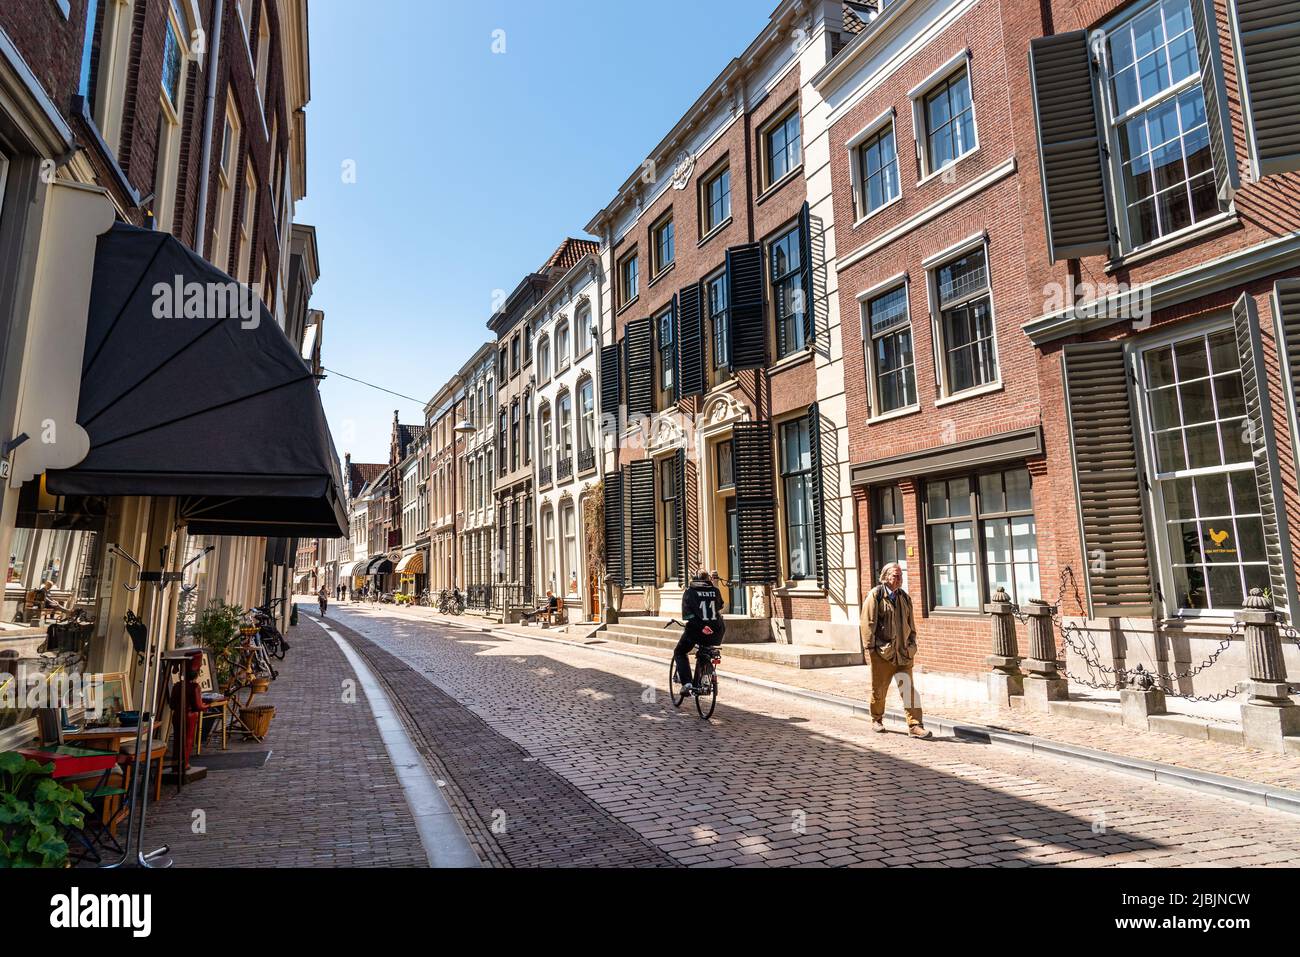 Dordrecht, Netherlands - May 8, 2022: Scenic view of the old town of Dordrecht in Western Netherlands Stock Photo